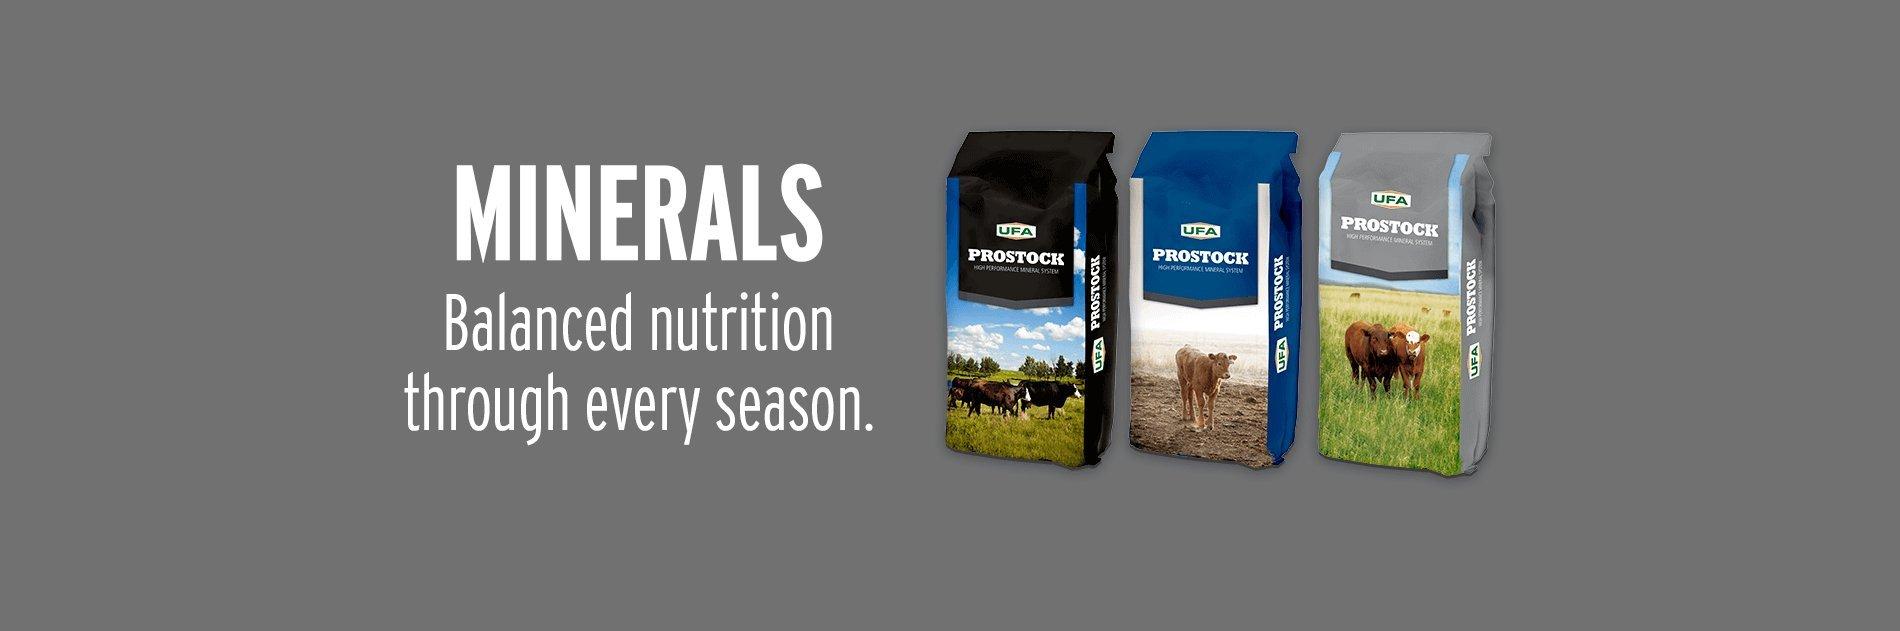 Minerals - Balanced Nutrition for Every Season